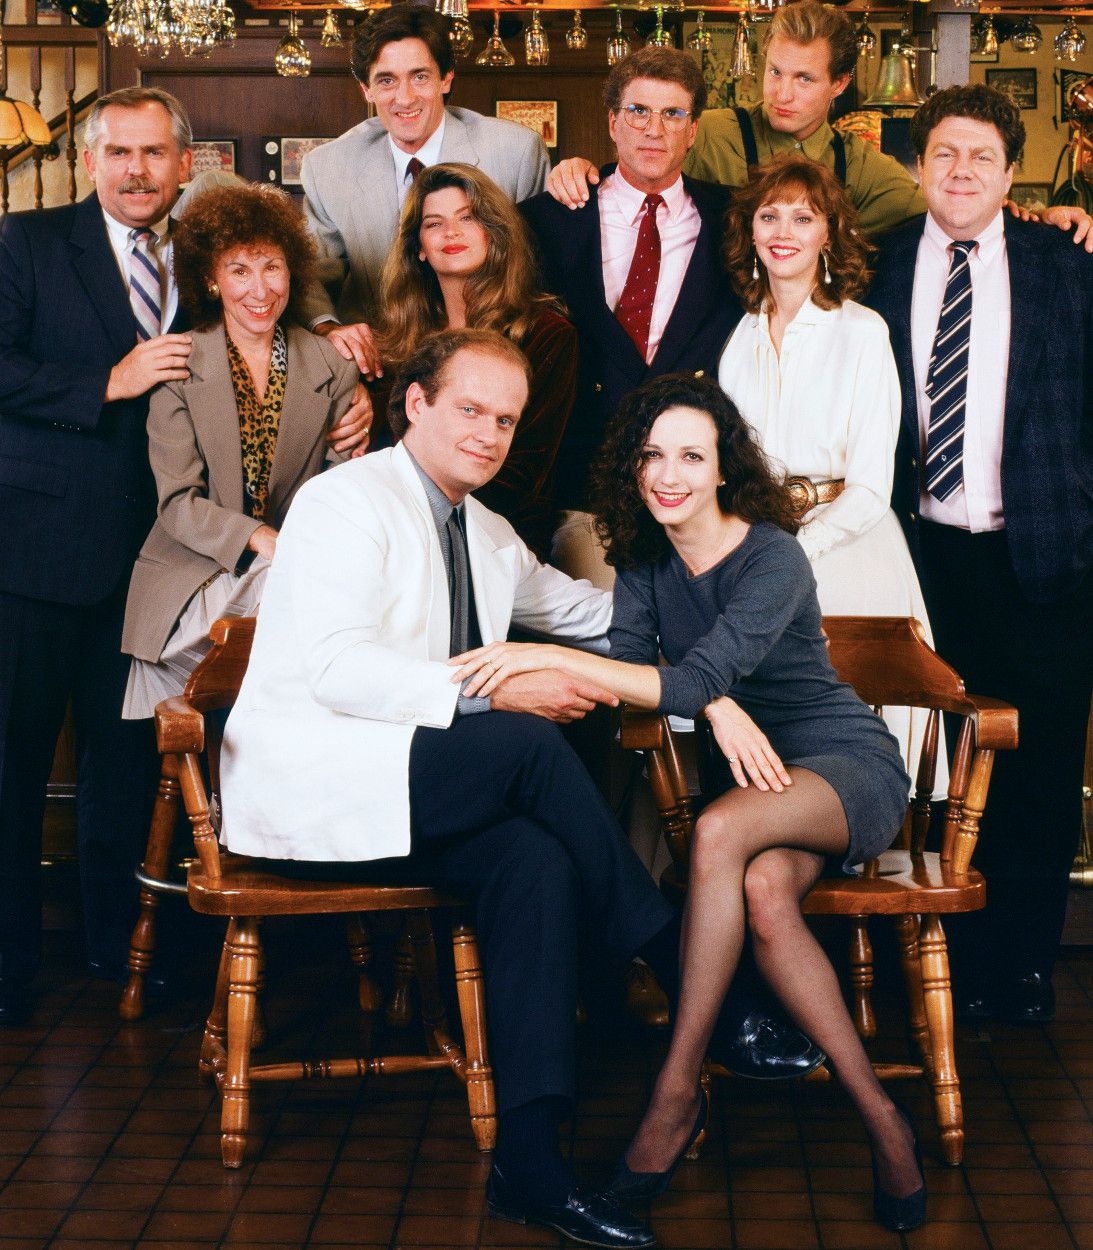 Steve Carell pitches Cheers reboot with Office cast